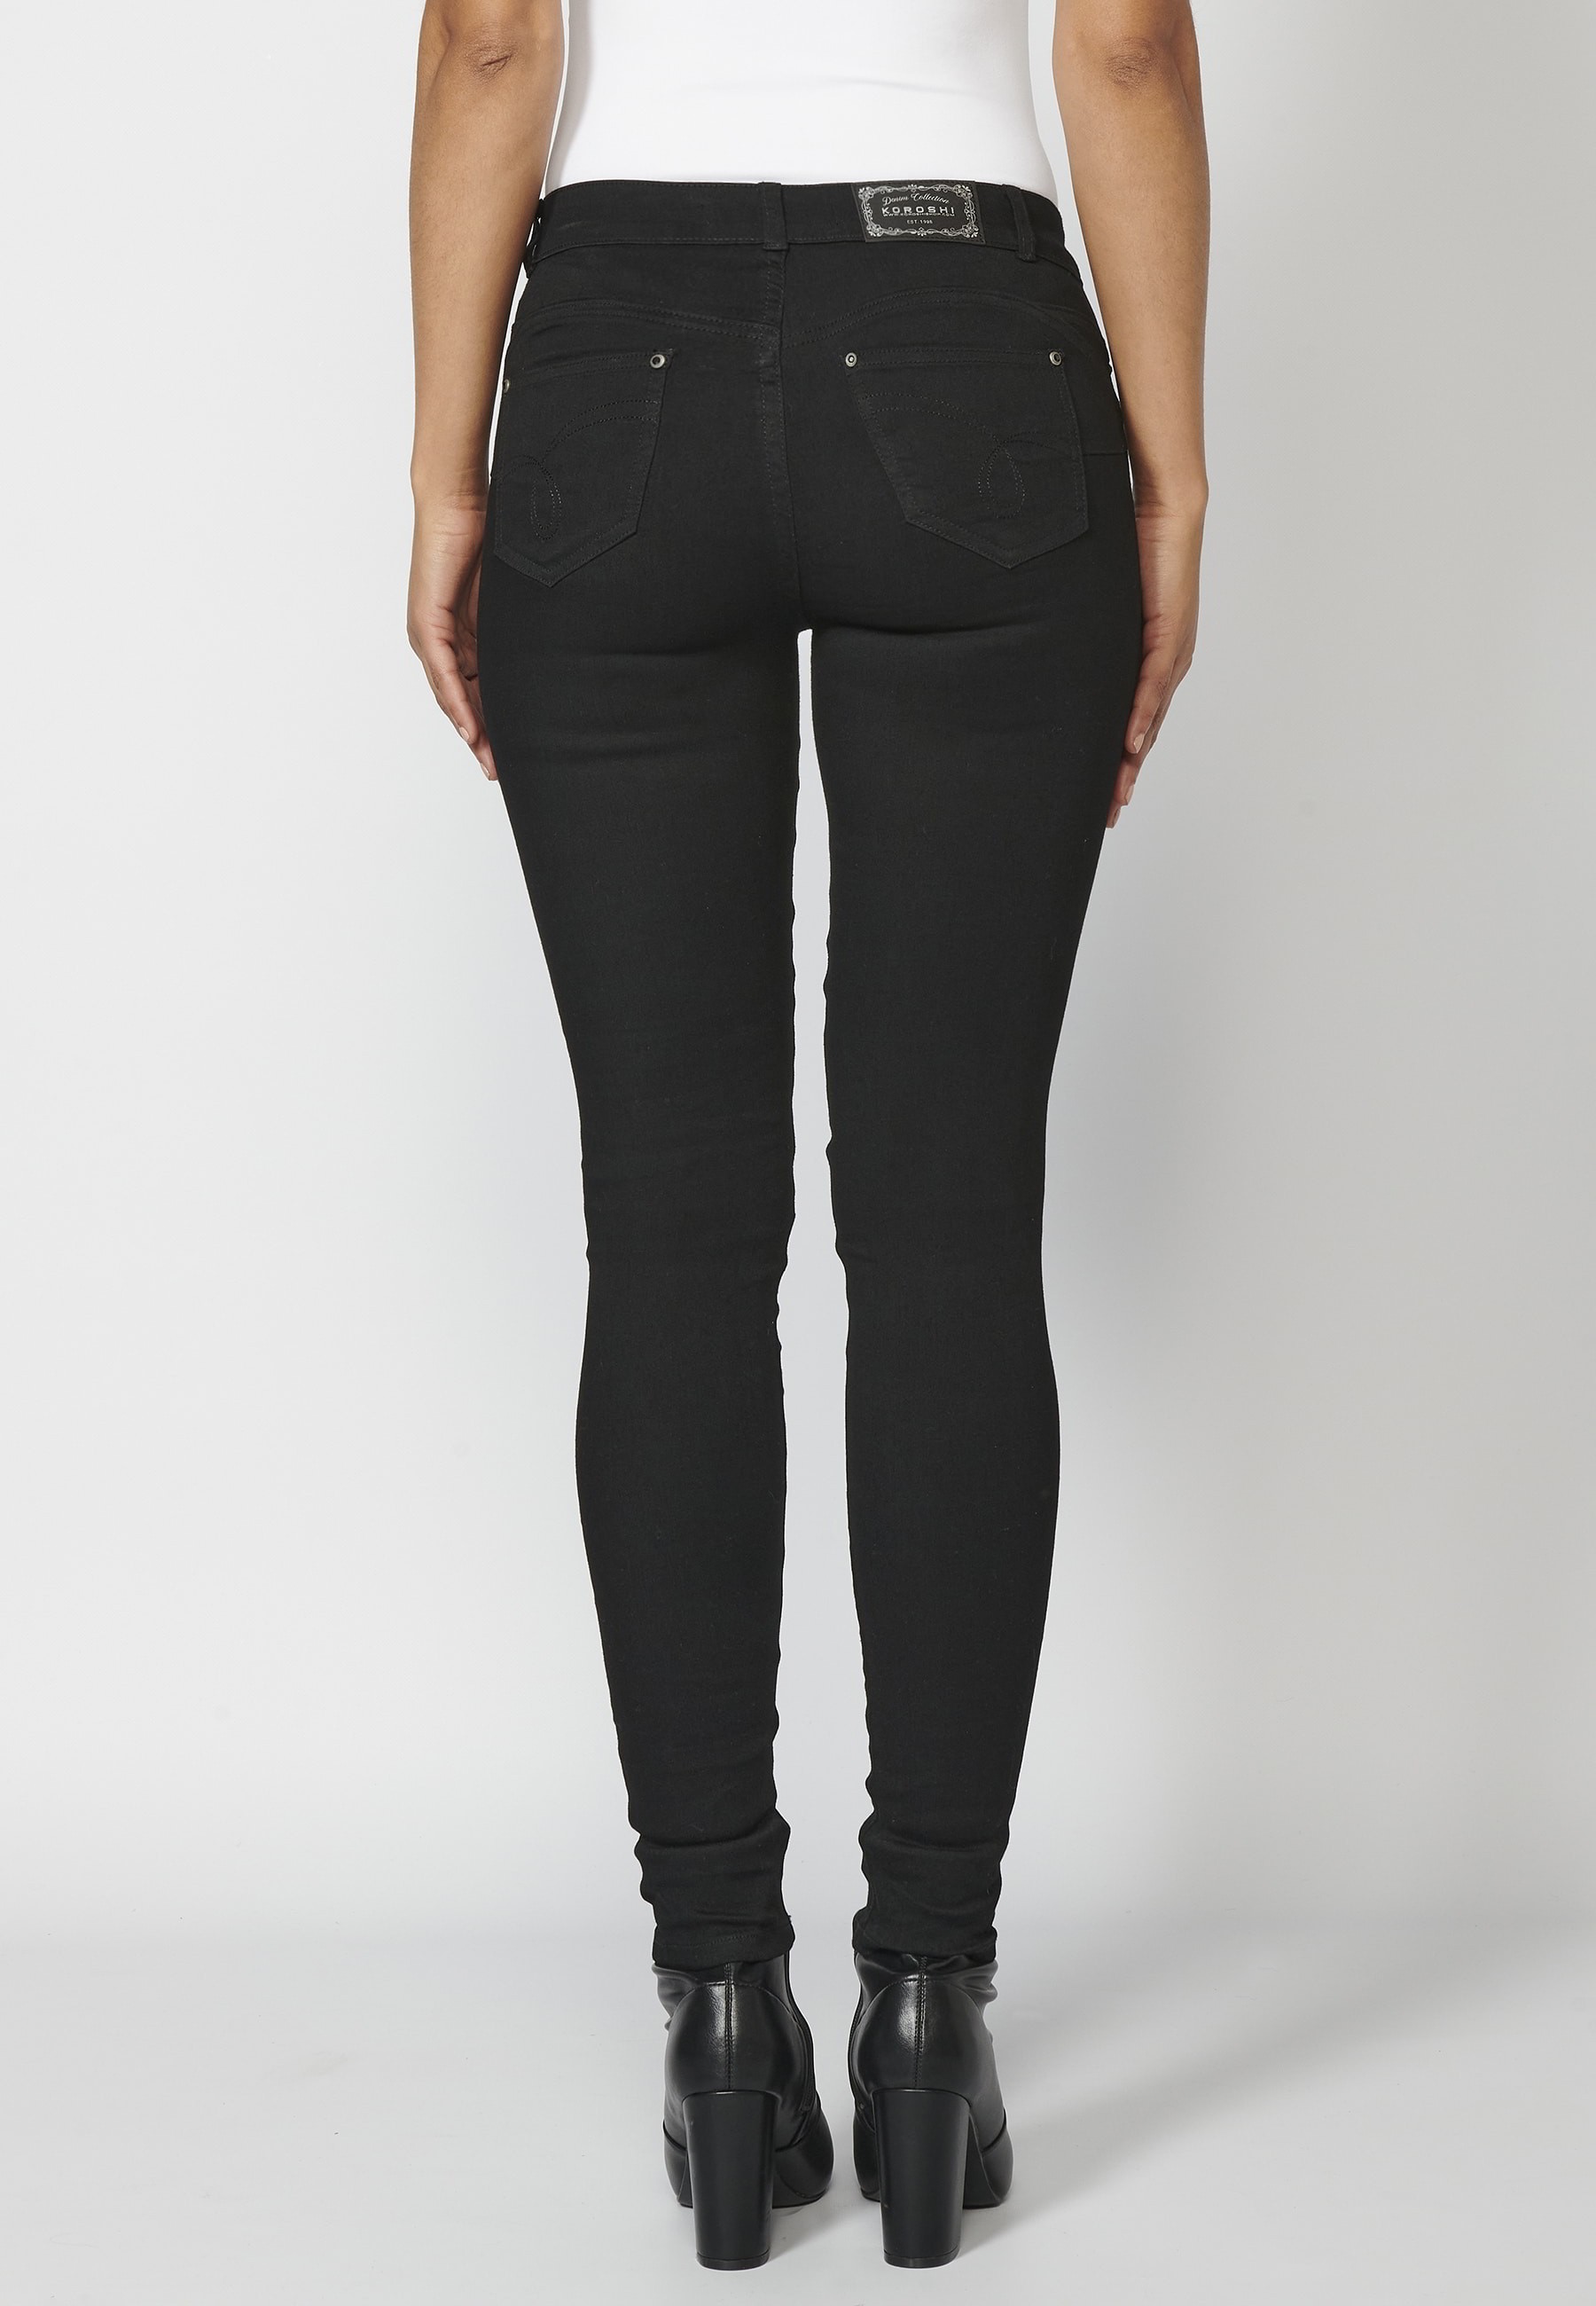 Long slim-fit jean pants with stud details on pockets in Black color for Woman